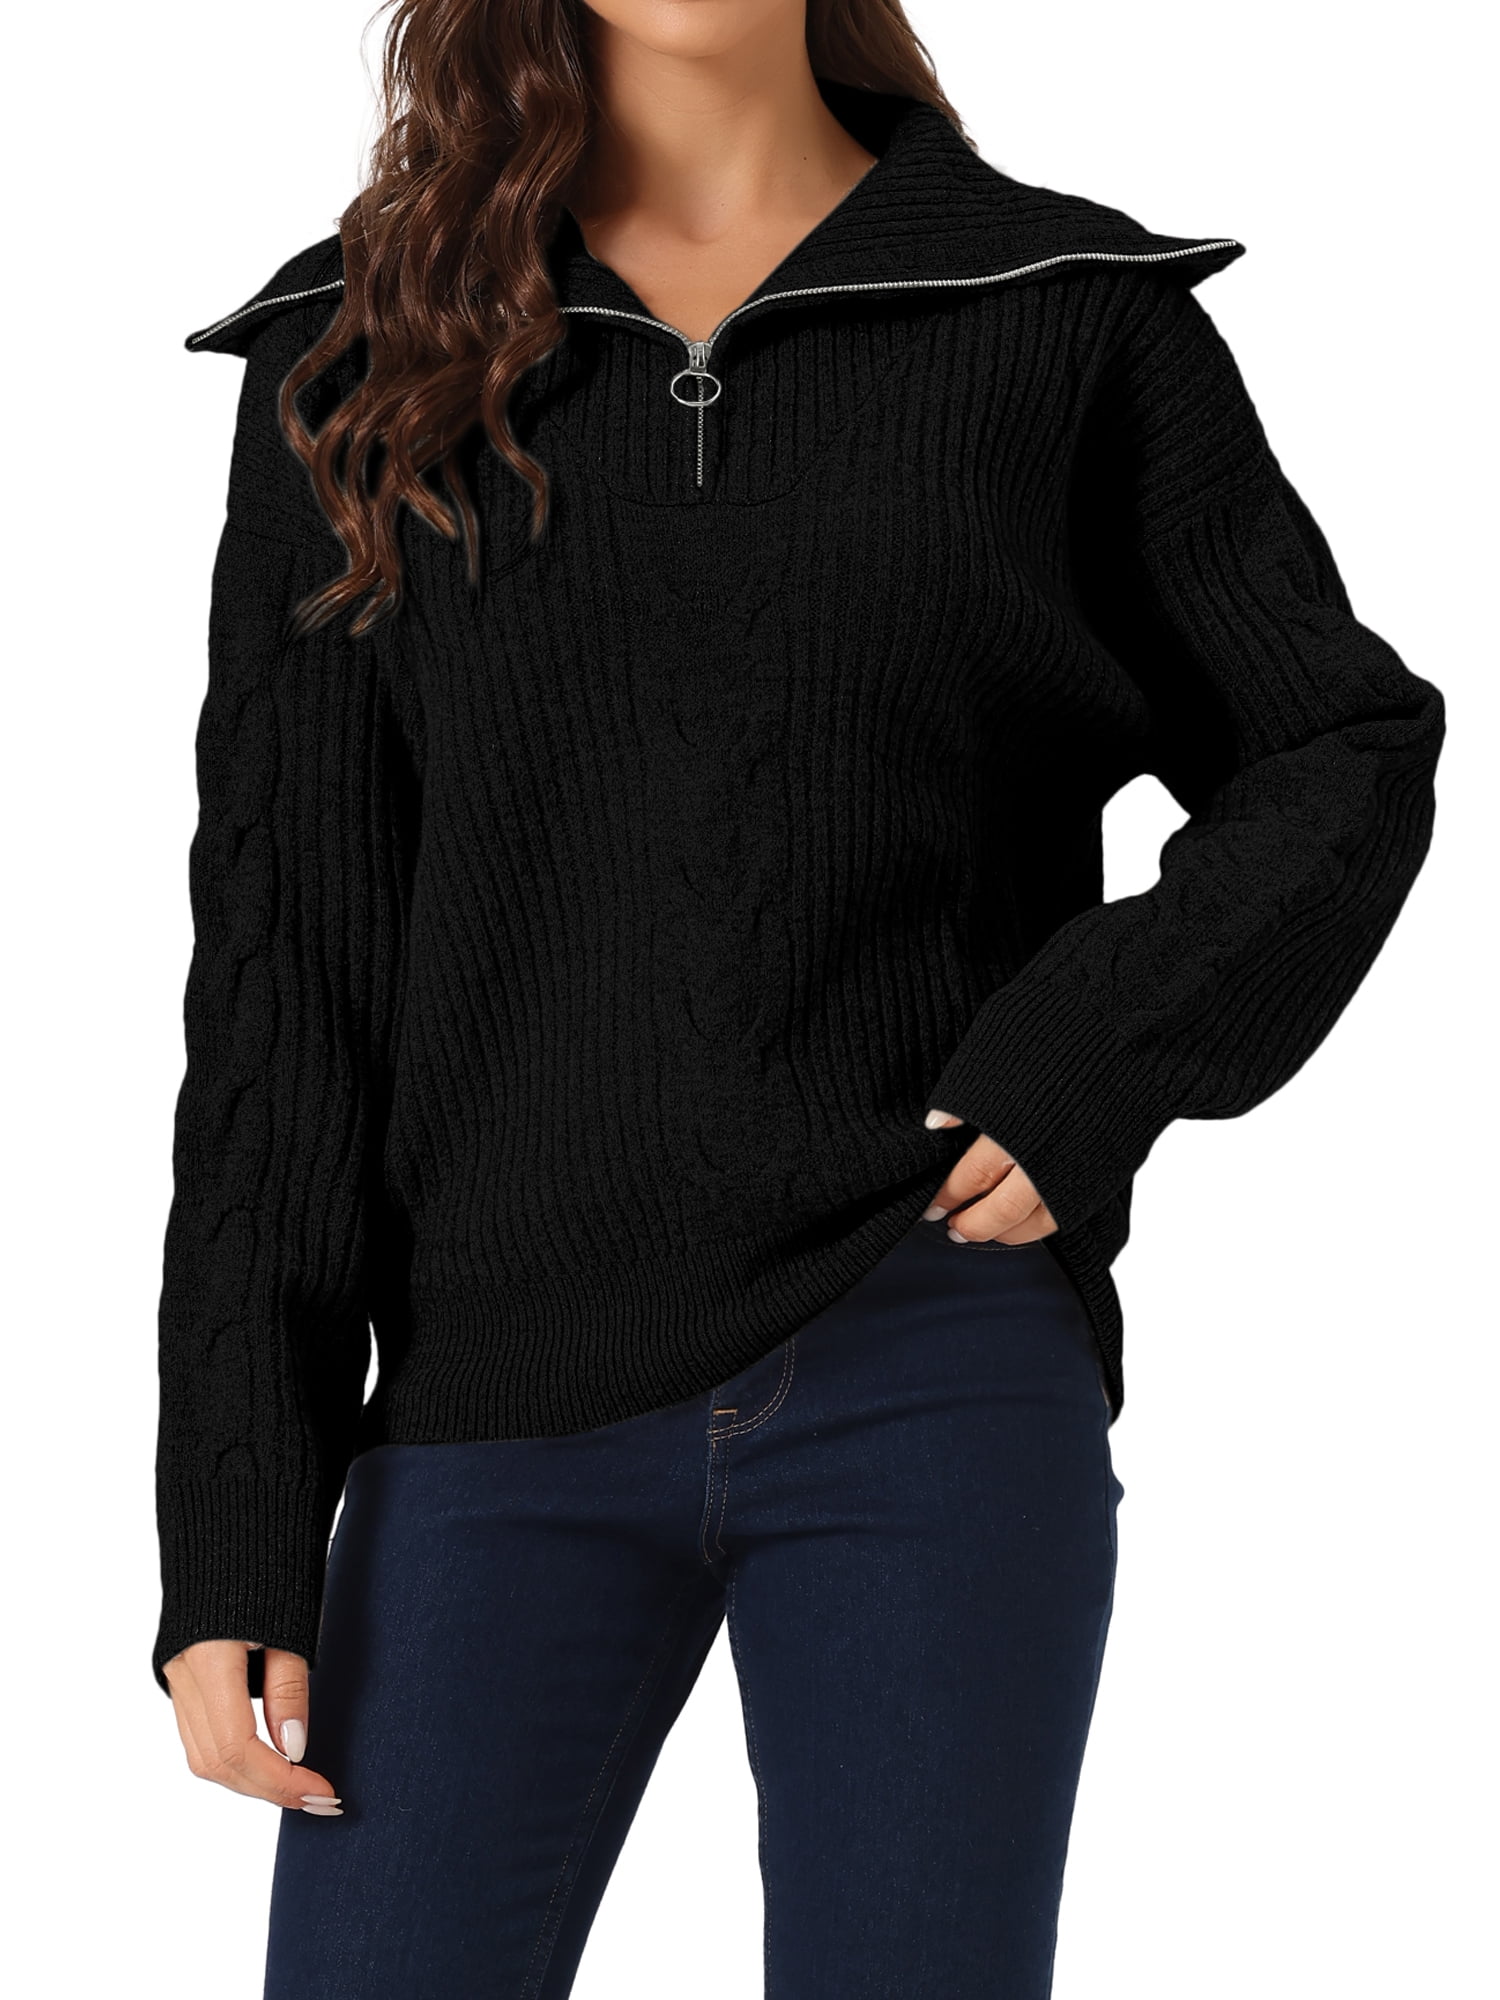 Unique Bargains Women's Half Zip V Neck Collar Ribbed Knitted